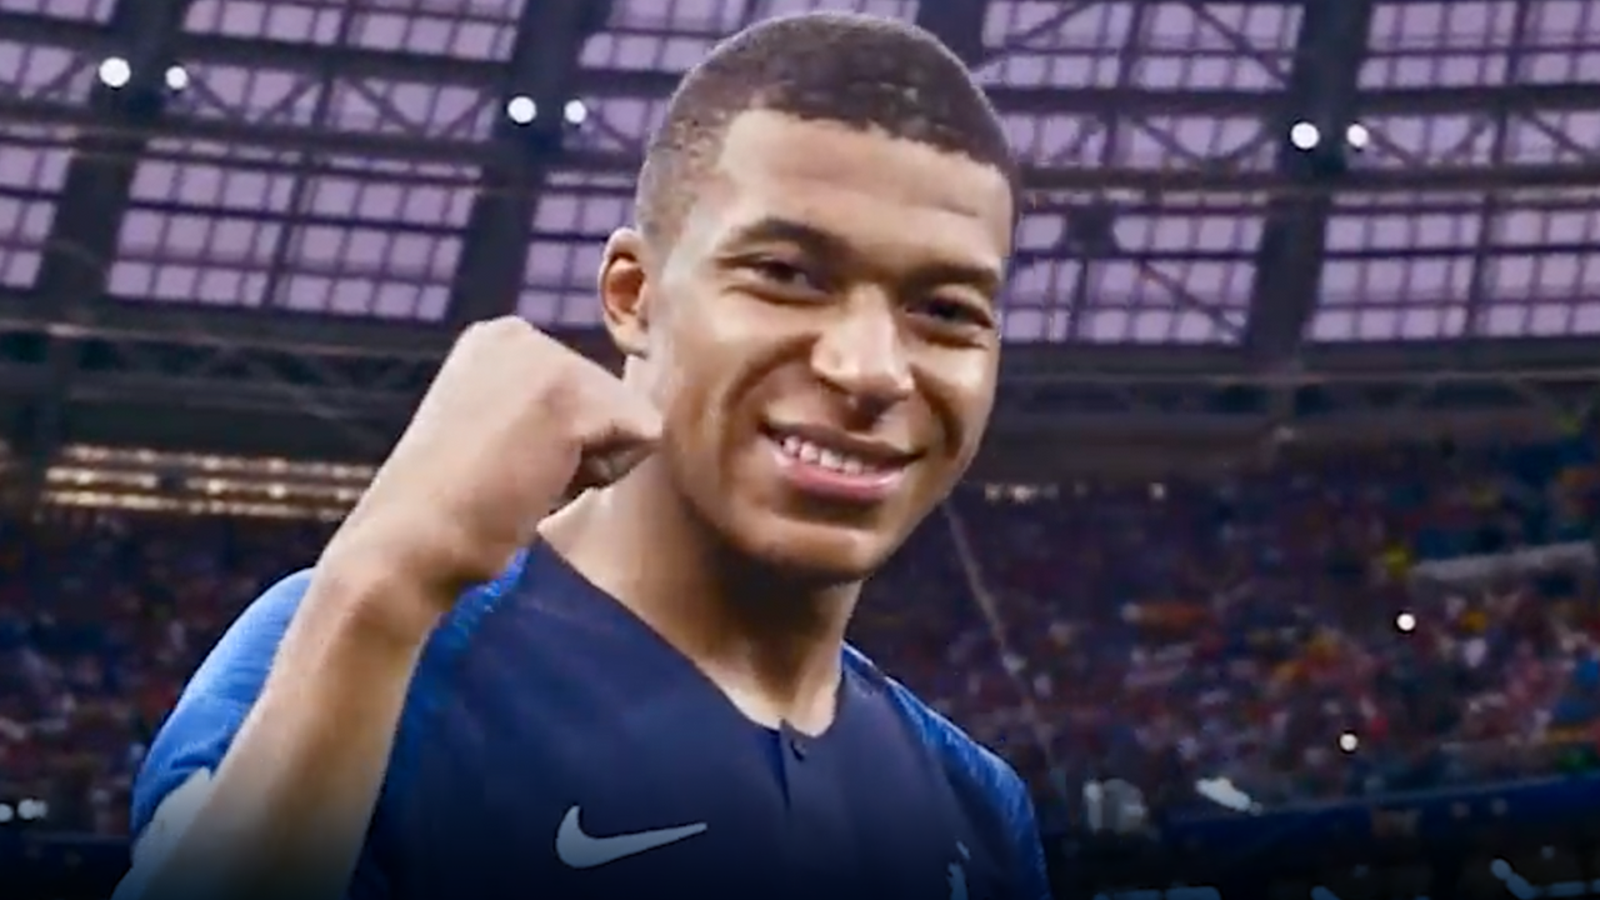 French star Kylian Mbappe is already exceeding soccer greats